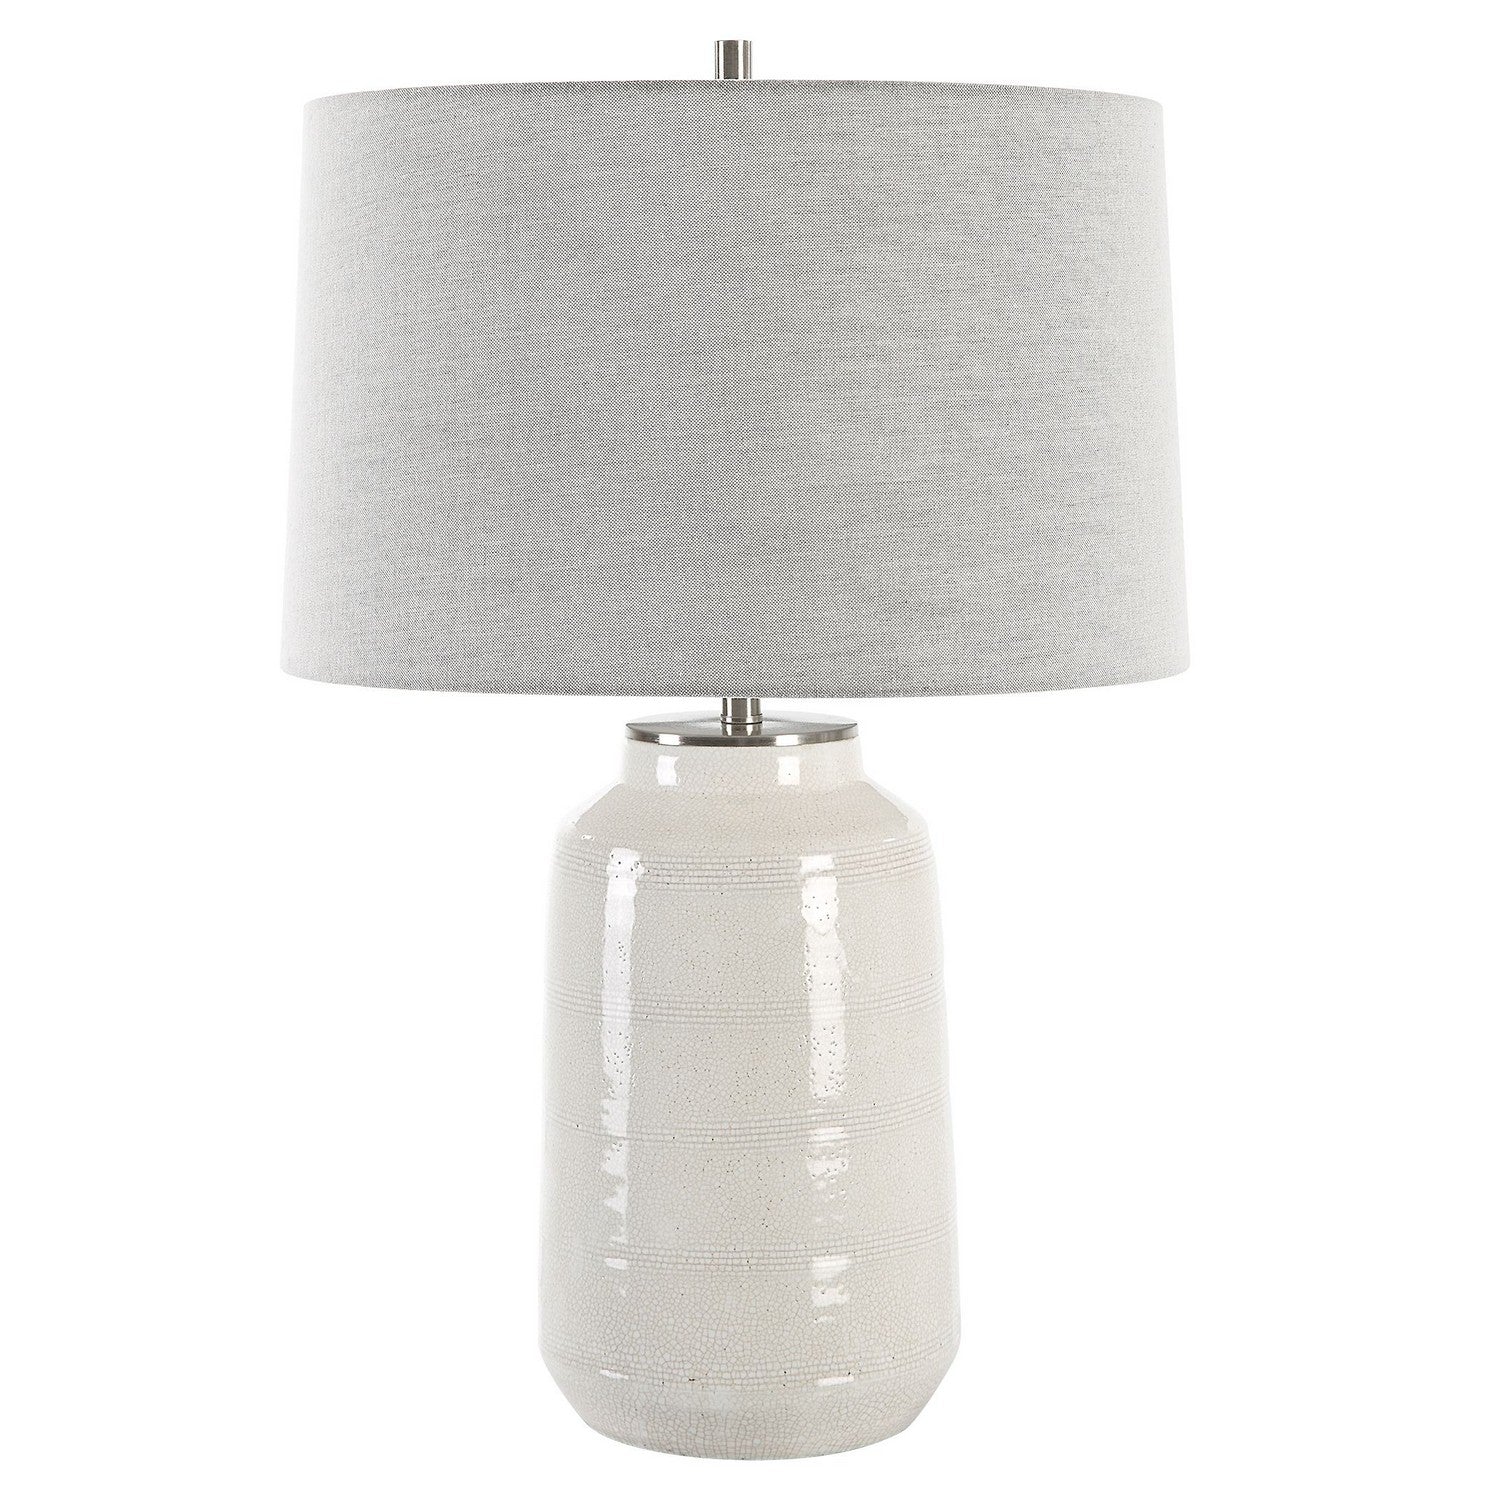 Uttermost - 30248-1 - One Light Table Lamp - Odawa - Brushed Nickel